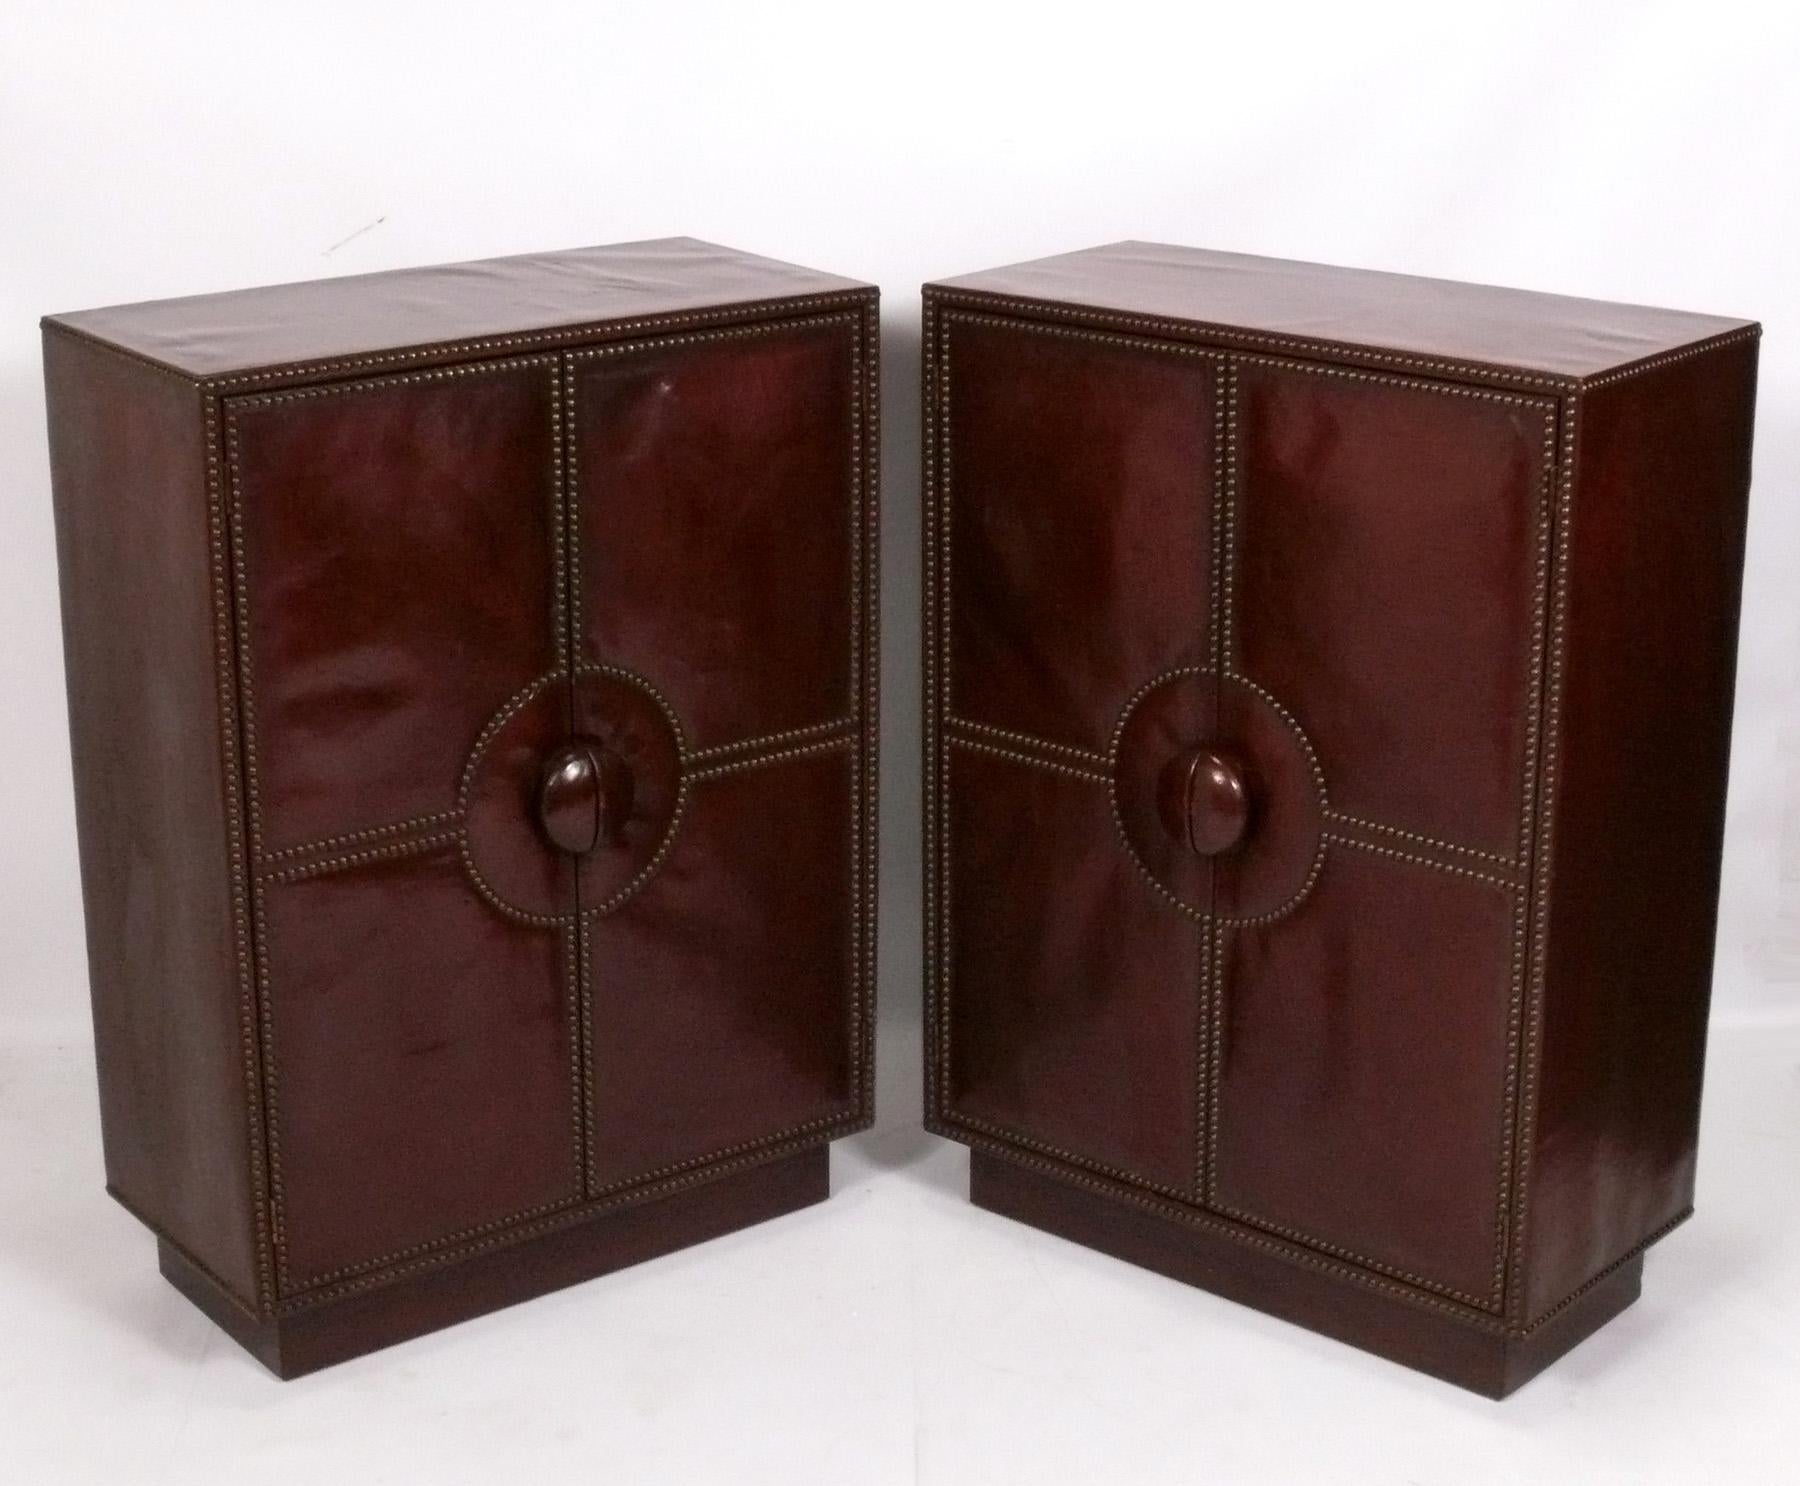 Elegant pair of brown leather and brass studded cabinets, attributed to William Billy Haynes for Sturgis, unsigned, American, circa 1930s. They are priced at $2800 each, or $4800 for the pair. They offer a voluminous amount of storage, with the left